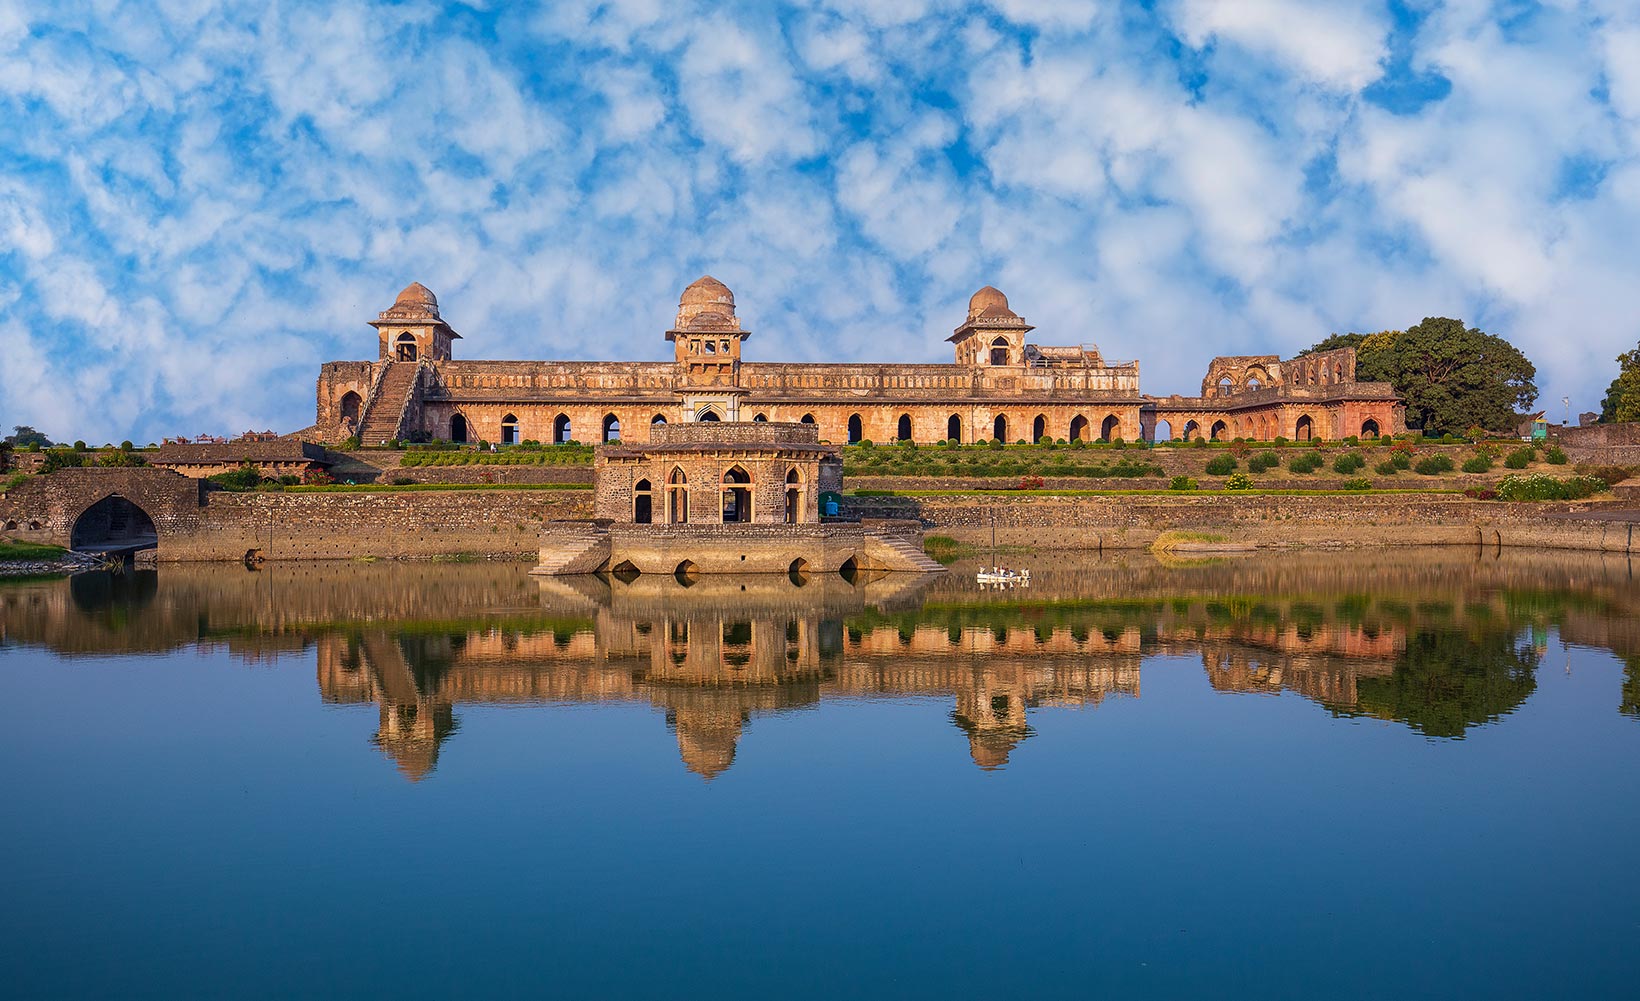 Mandu: The Shining Jewel of Empires in Central India